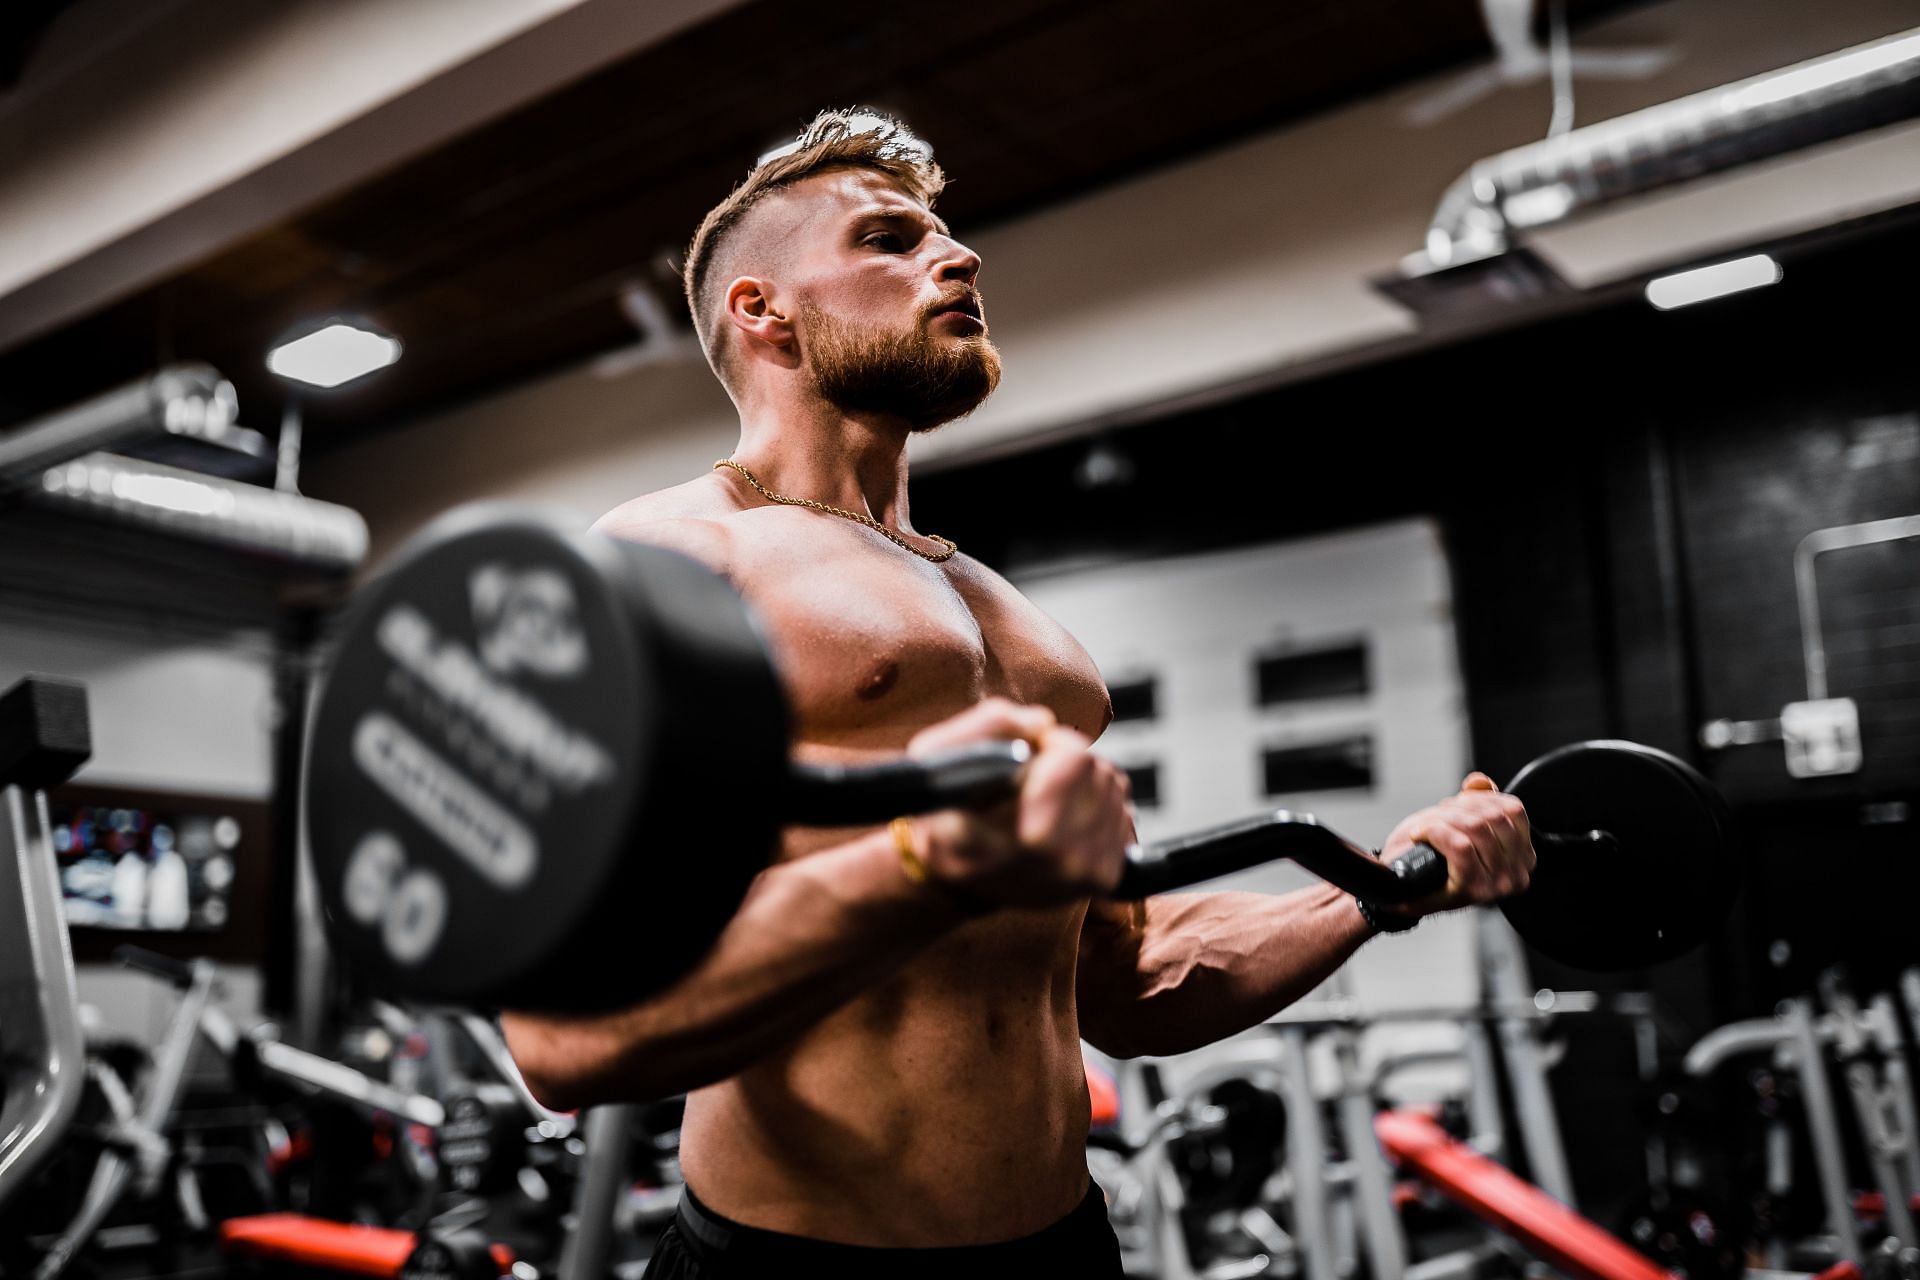 Exercise can help shrink the area to a more proportionate size in men whose breasts may just hold extra fat. (Image via Unsplash/ Anastase Maragos)